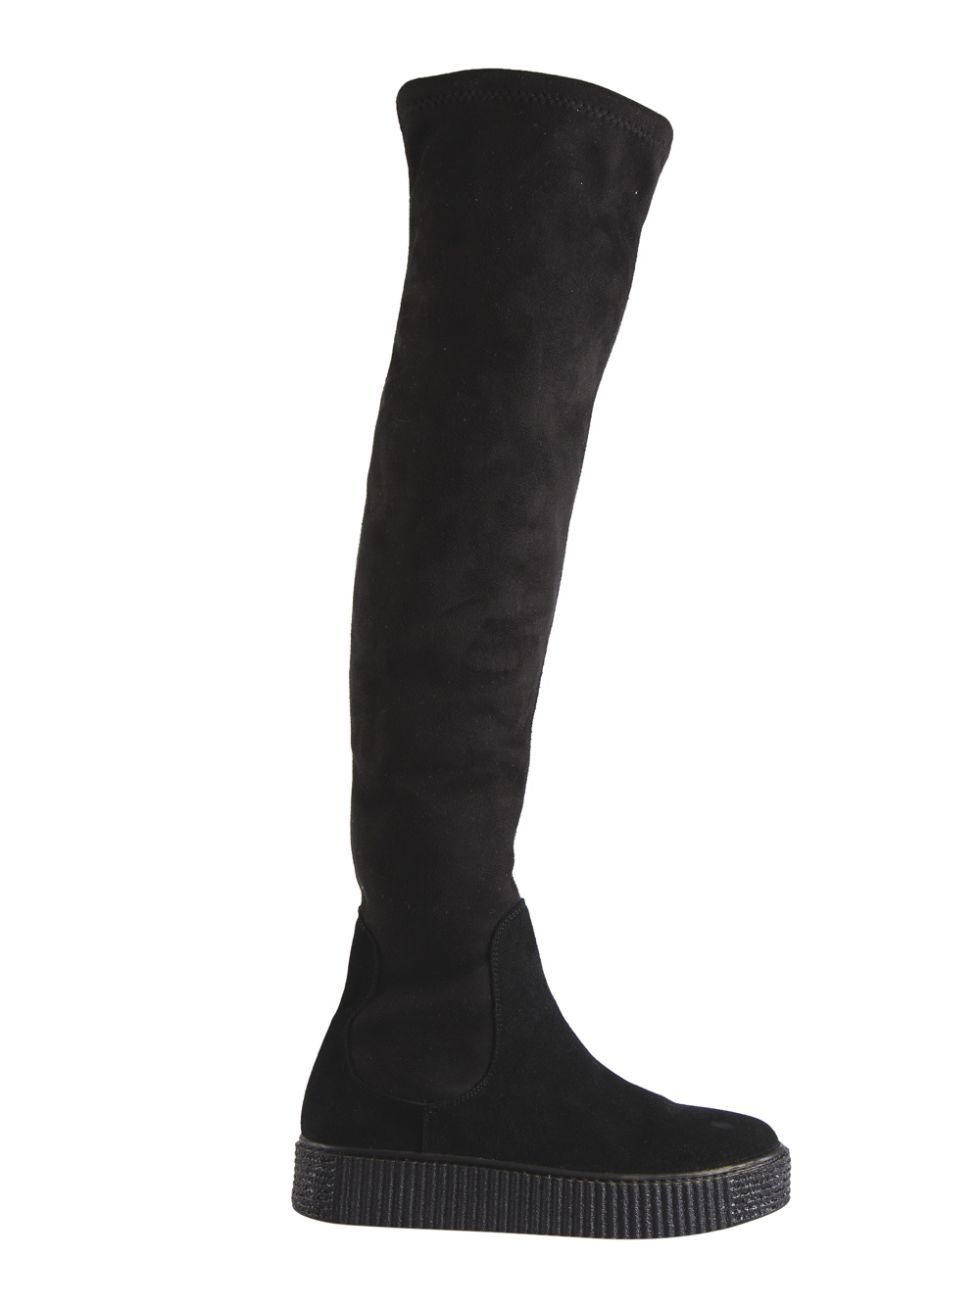 Footwear, Boot, Shoe, Knee-high boot, Riding boot, Suede, Durango boot, Leather, Costume accessory, Work boots, 